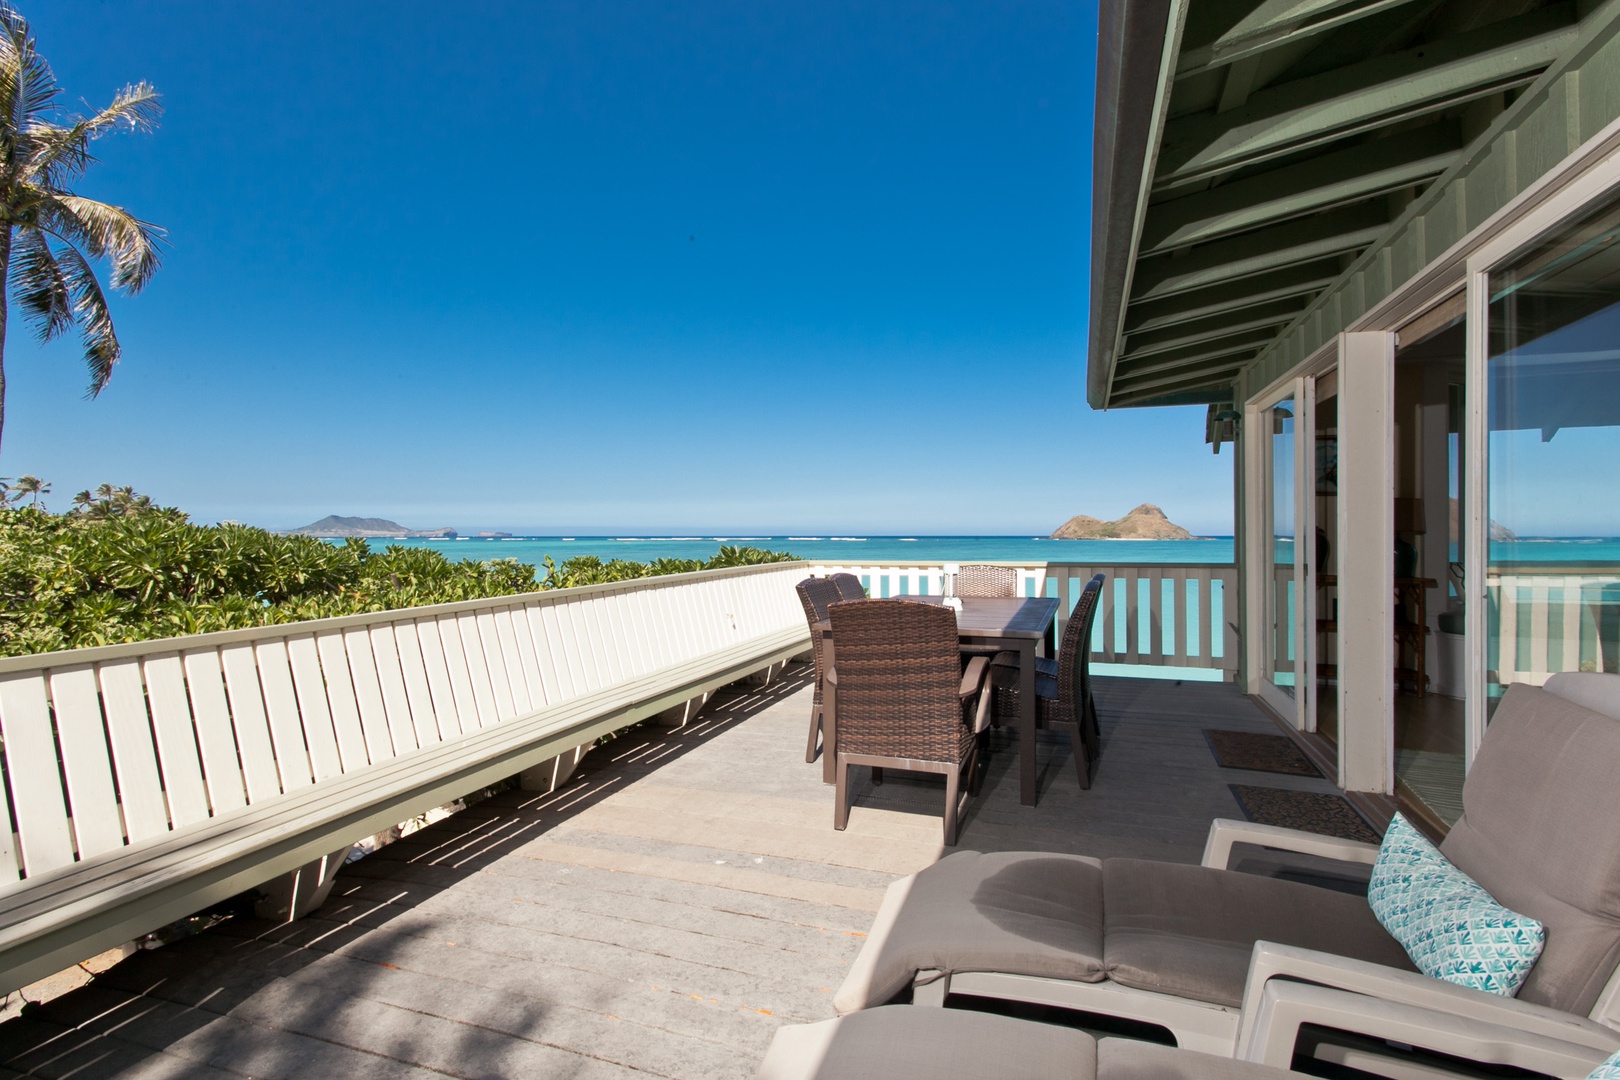 Kailua Vacation Rentals, Hale Kainalu* - Views from the lanai with sun loungers is the best spot to relax